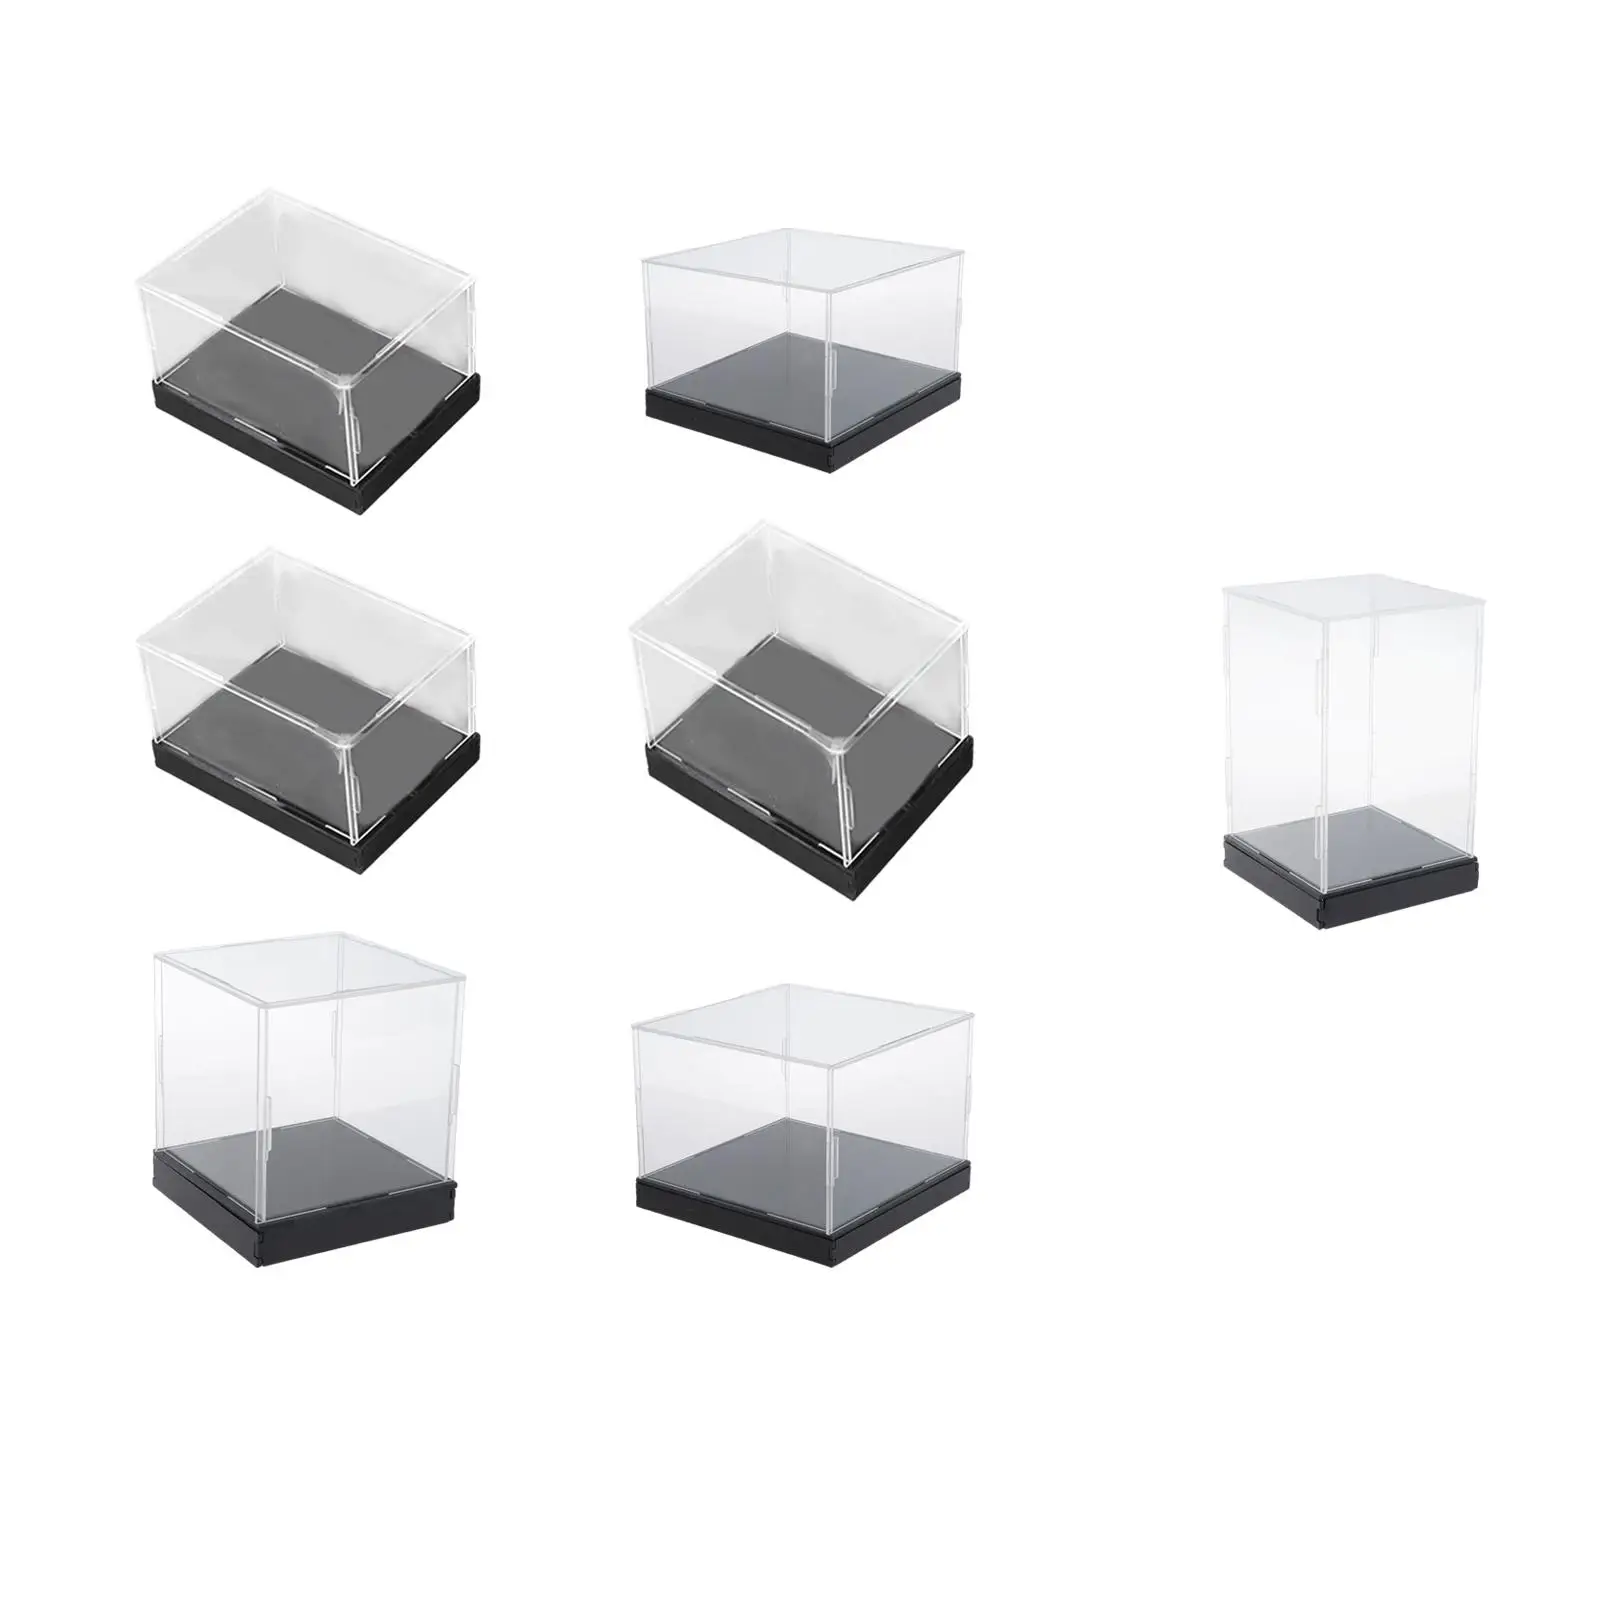 Transparent Acrylic Display Case Black Base Container for Cosmetics Miniature Figurines Doll Toy Display Show Case